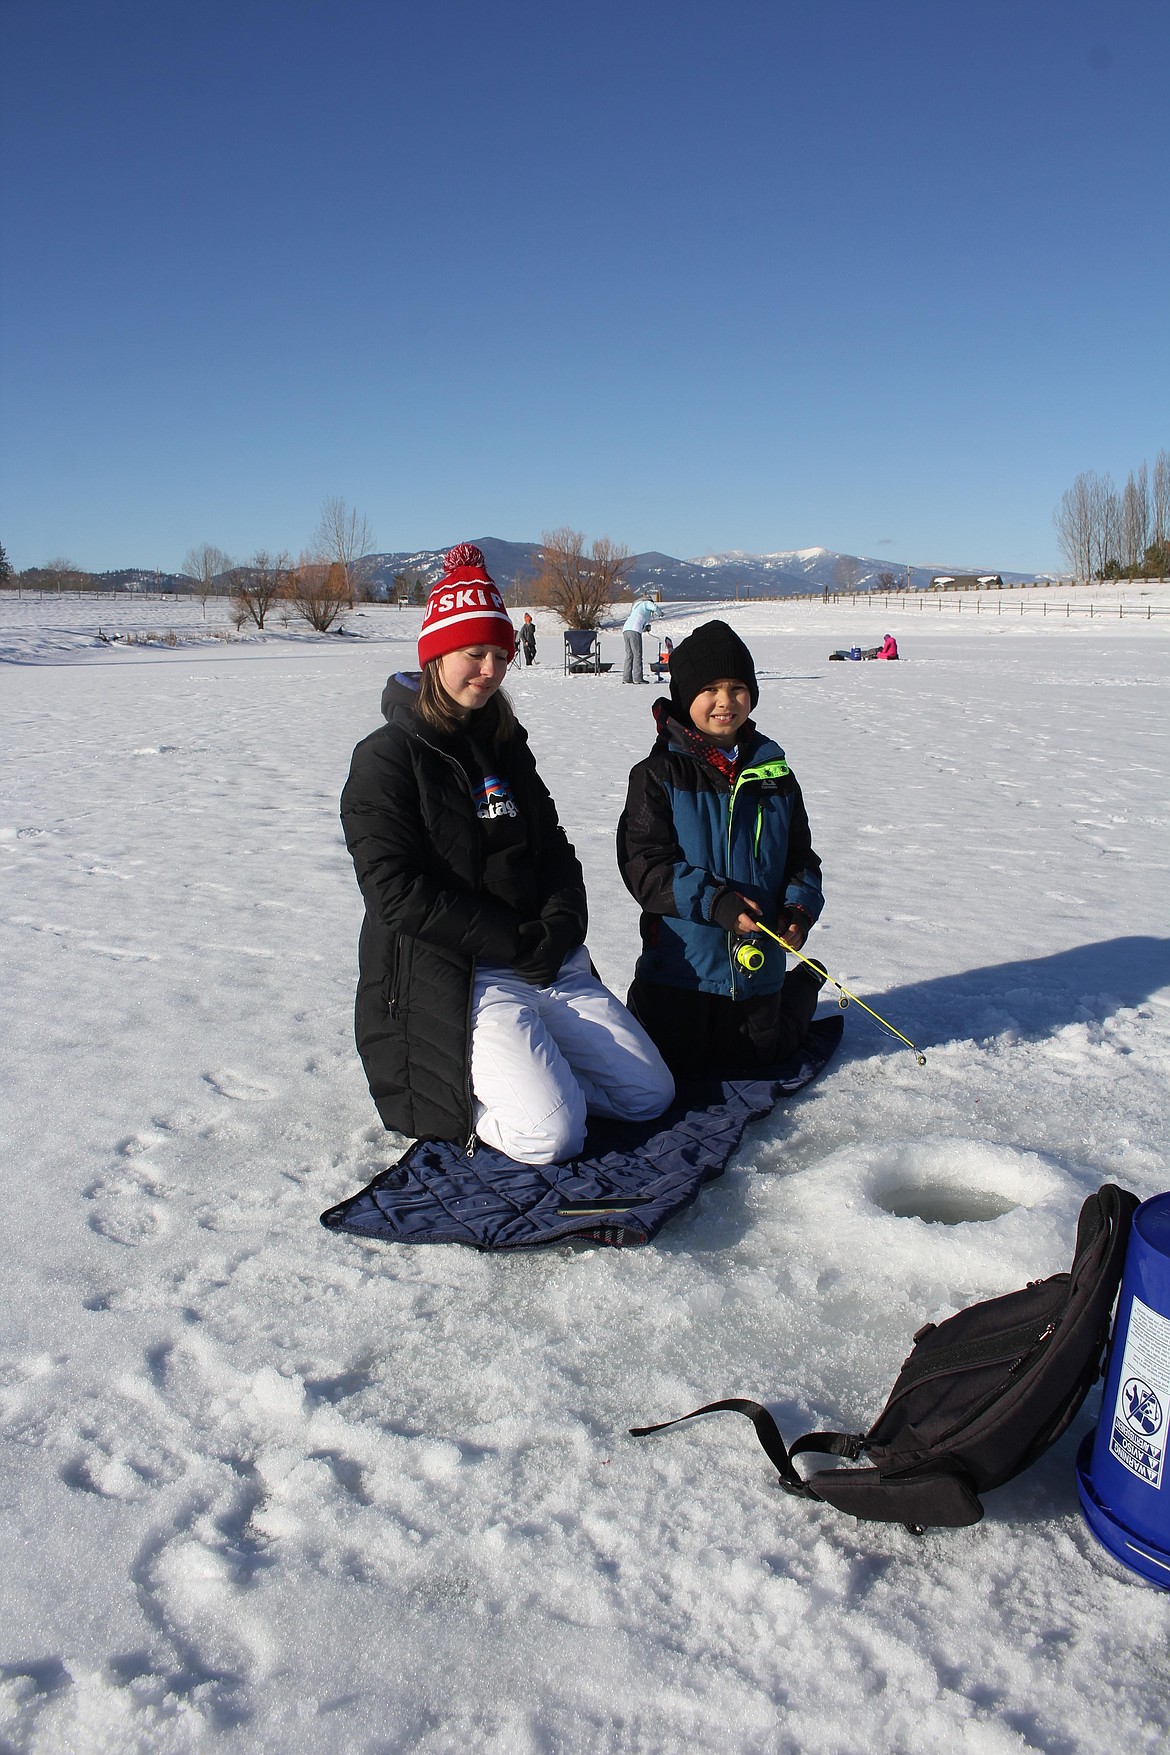 Dylan Connor, 8, and his mom Sandra, drove from St. Regis to participate in the annual Kids Fishing Clinic on Frenchtown Pond last Saturday. They were the first in line to register at 8am with the event starting at 9 and closing at 1. Over 150 kids participated. (Monte Turner/Mineral Independent)